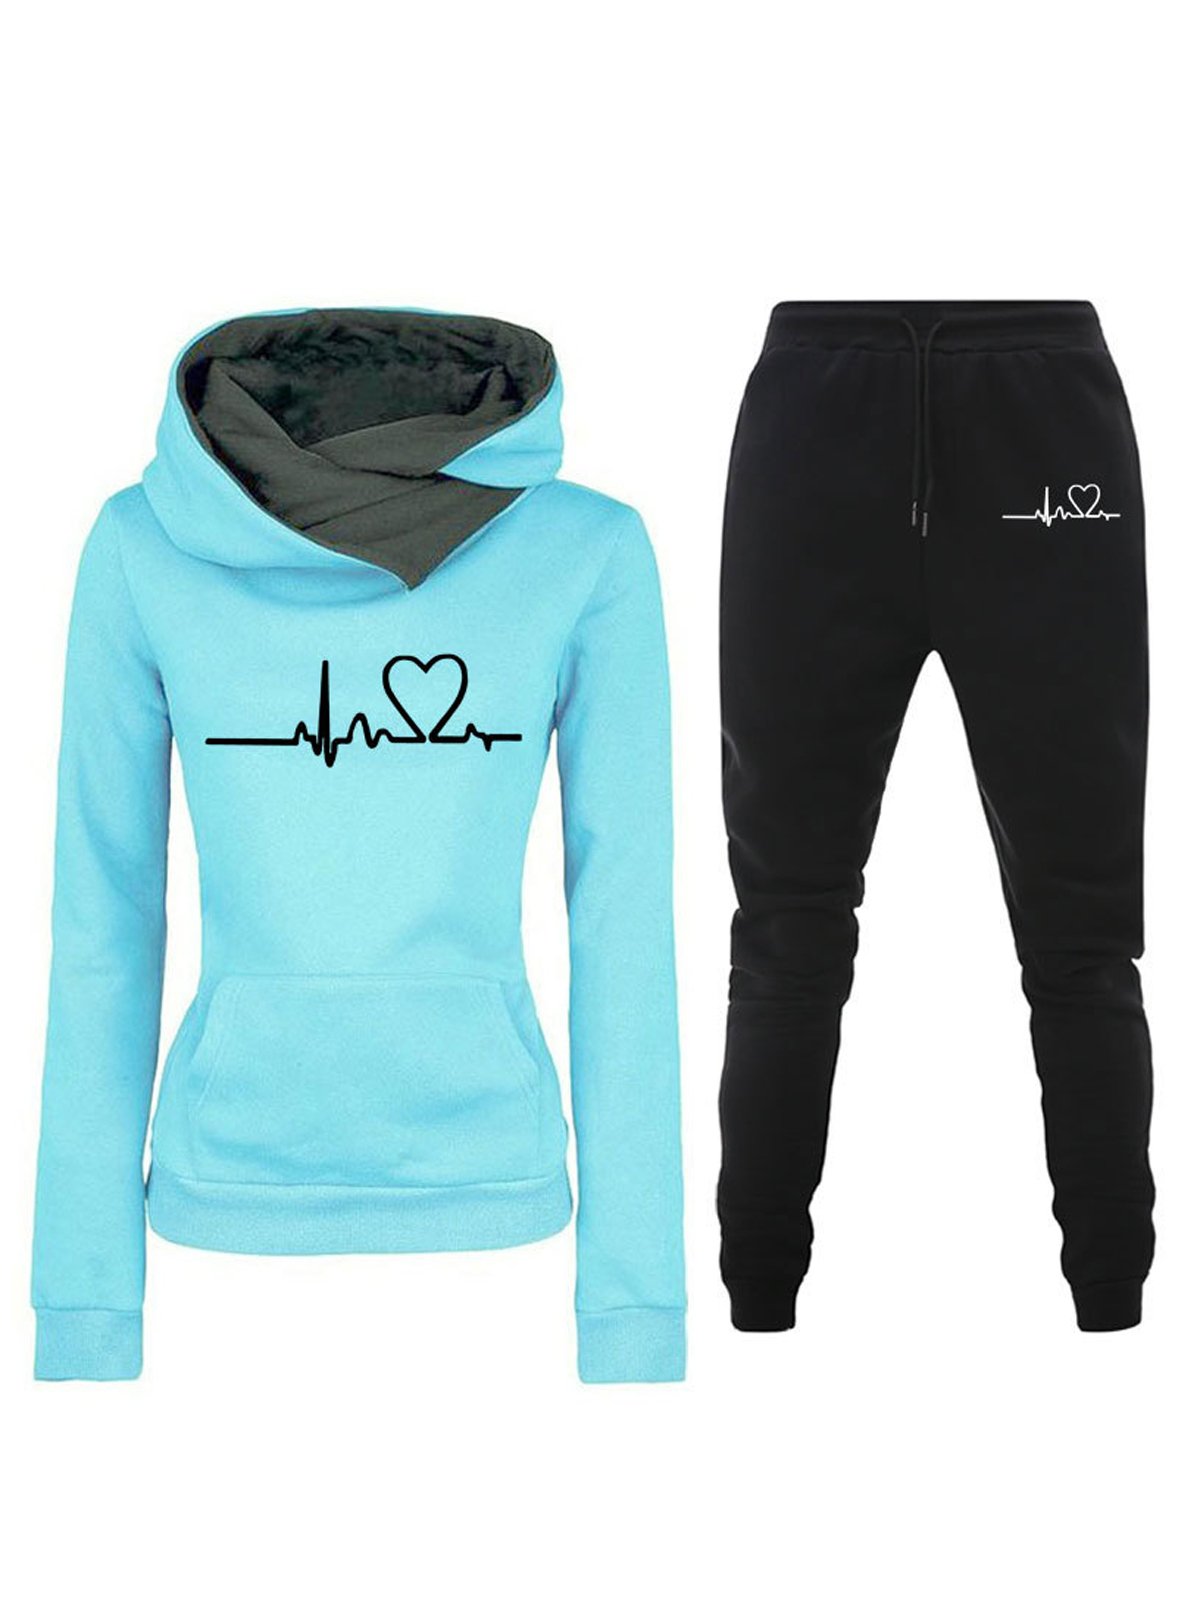 Women Text Letters Hoodie Long Sleeve Comfy Casual Top With Pants Two-Piece Set